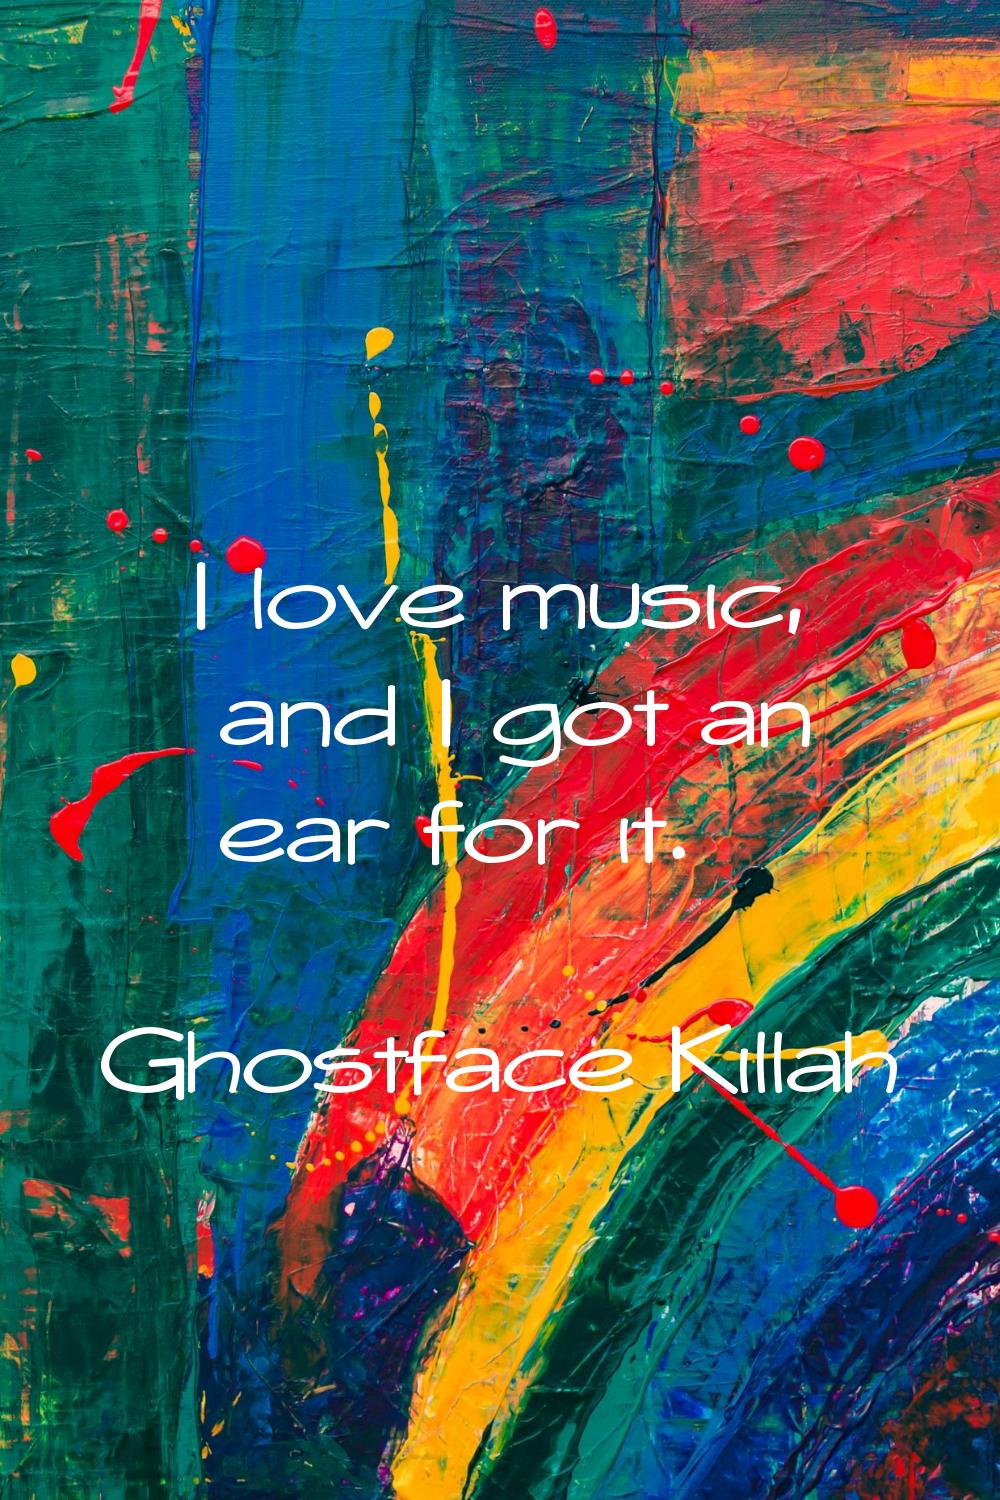 I love music, and I got an ear for it.